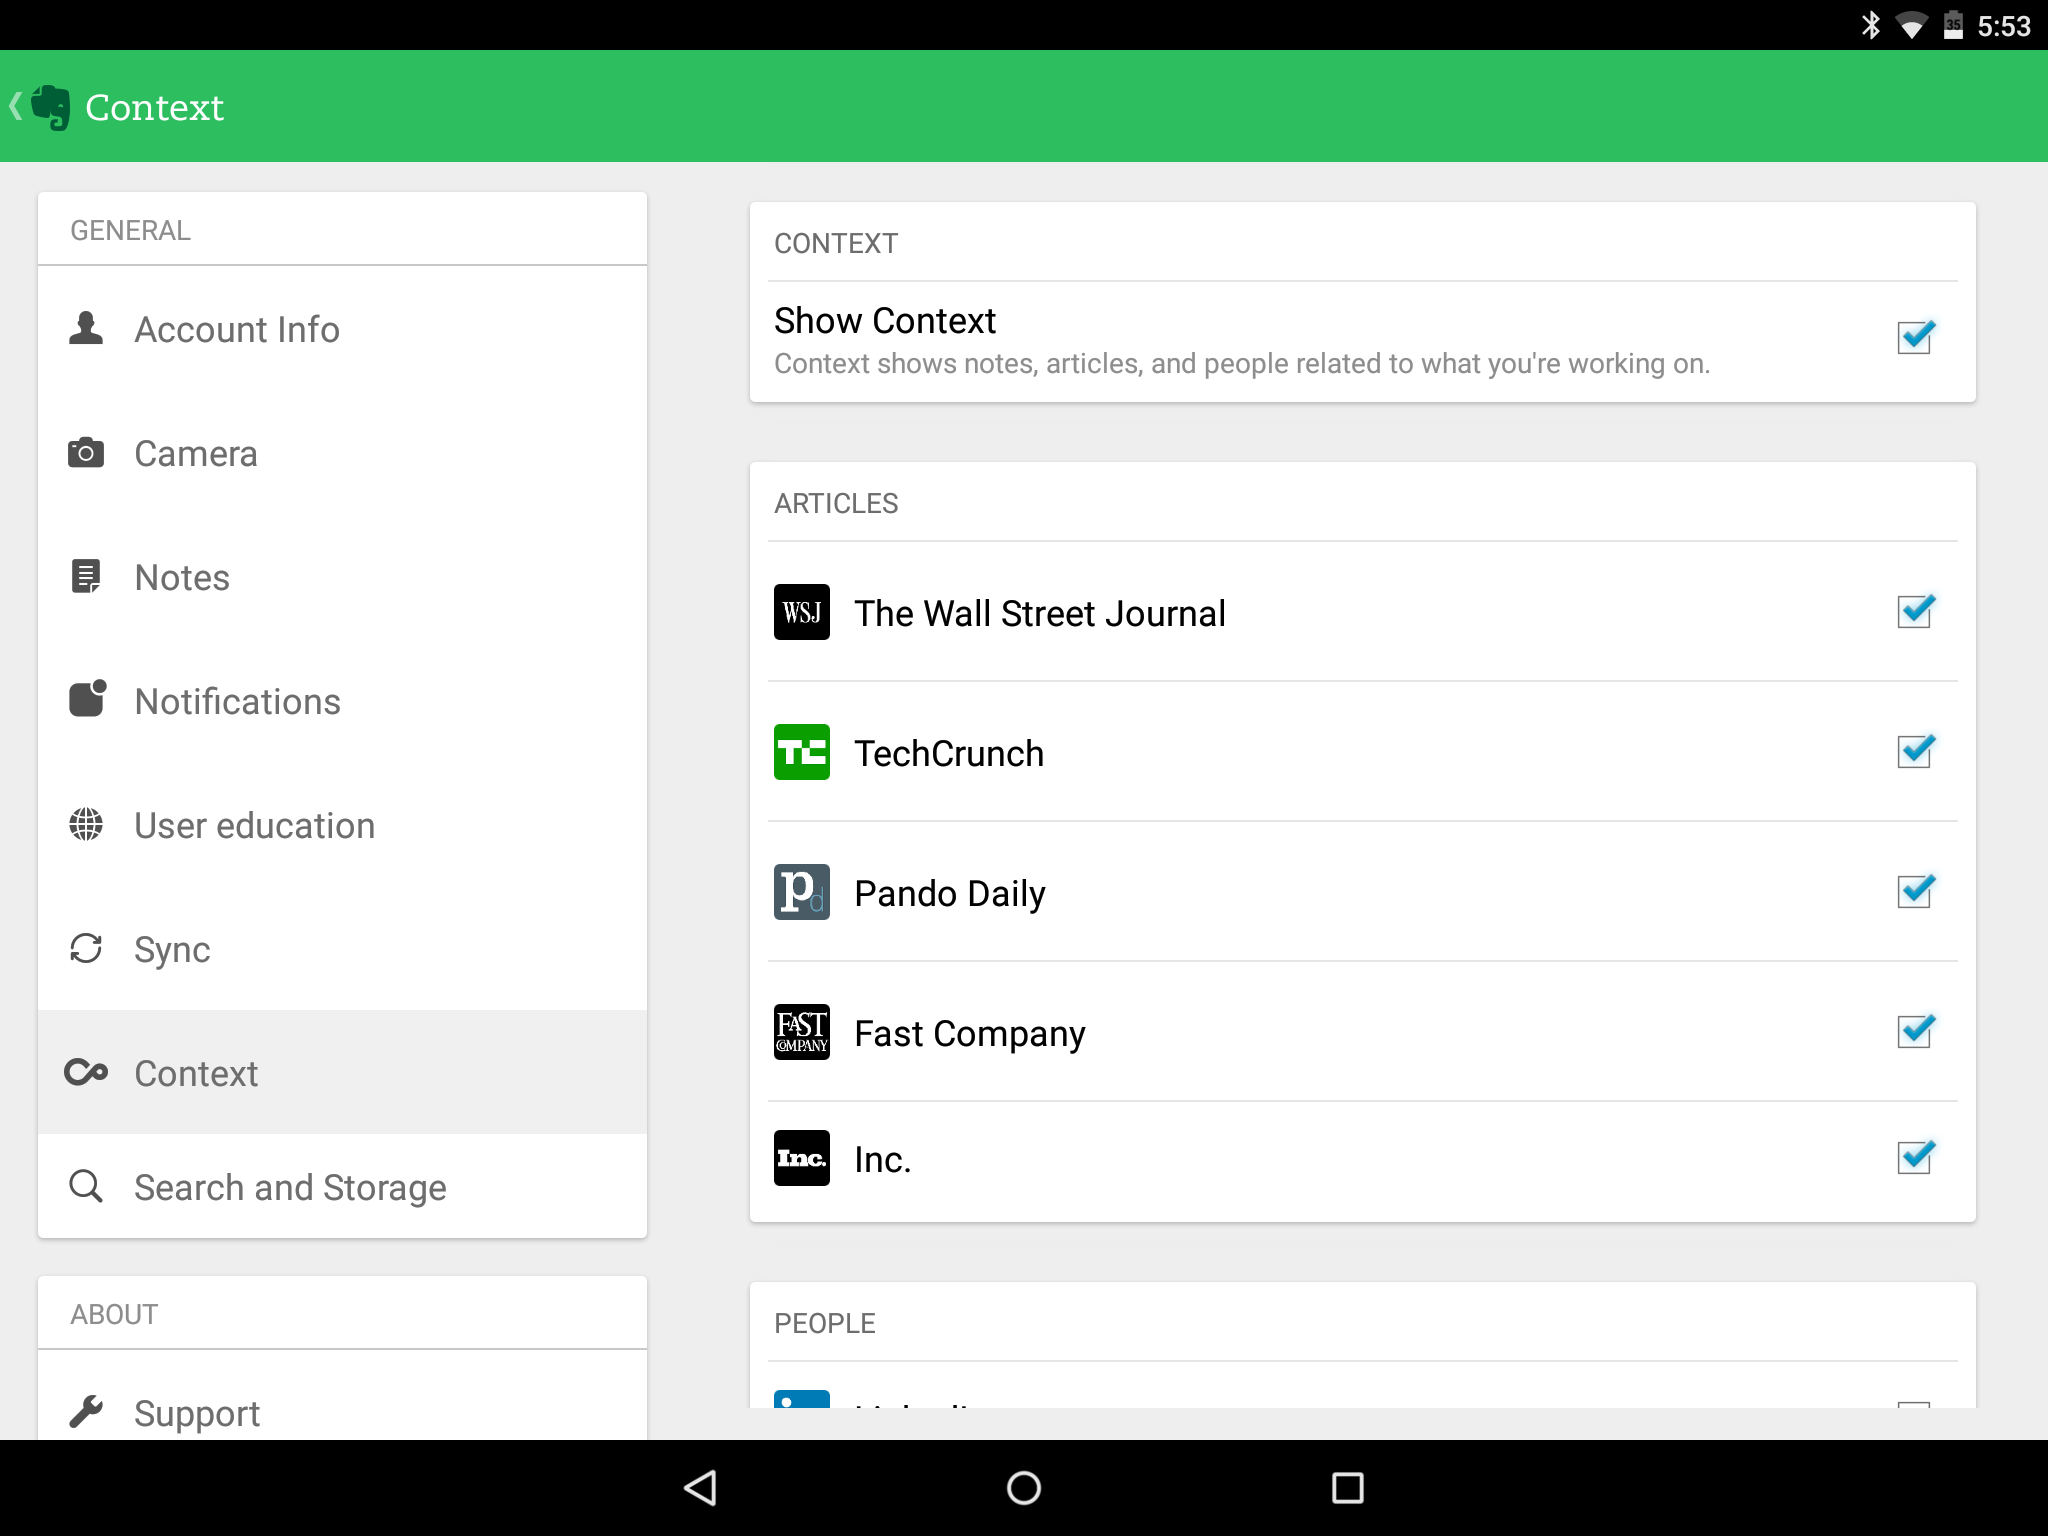 The Latest Evernote Update Brings Relevant Content Suggestions To Your